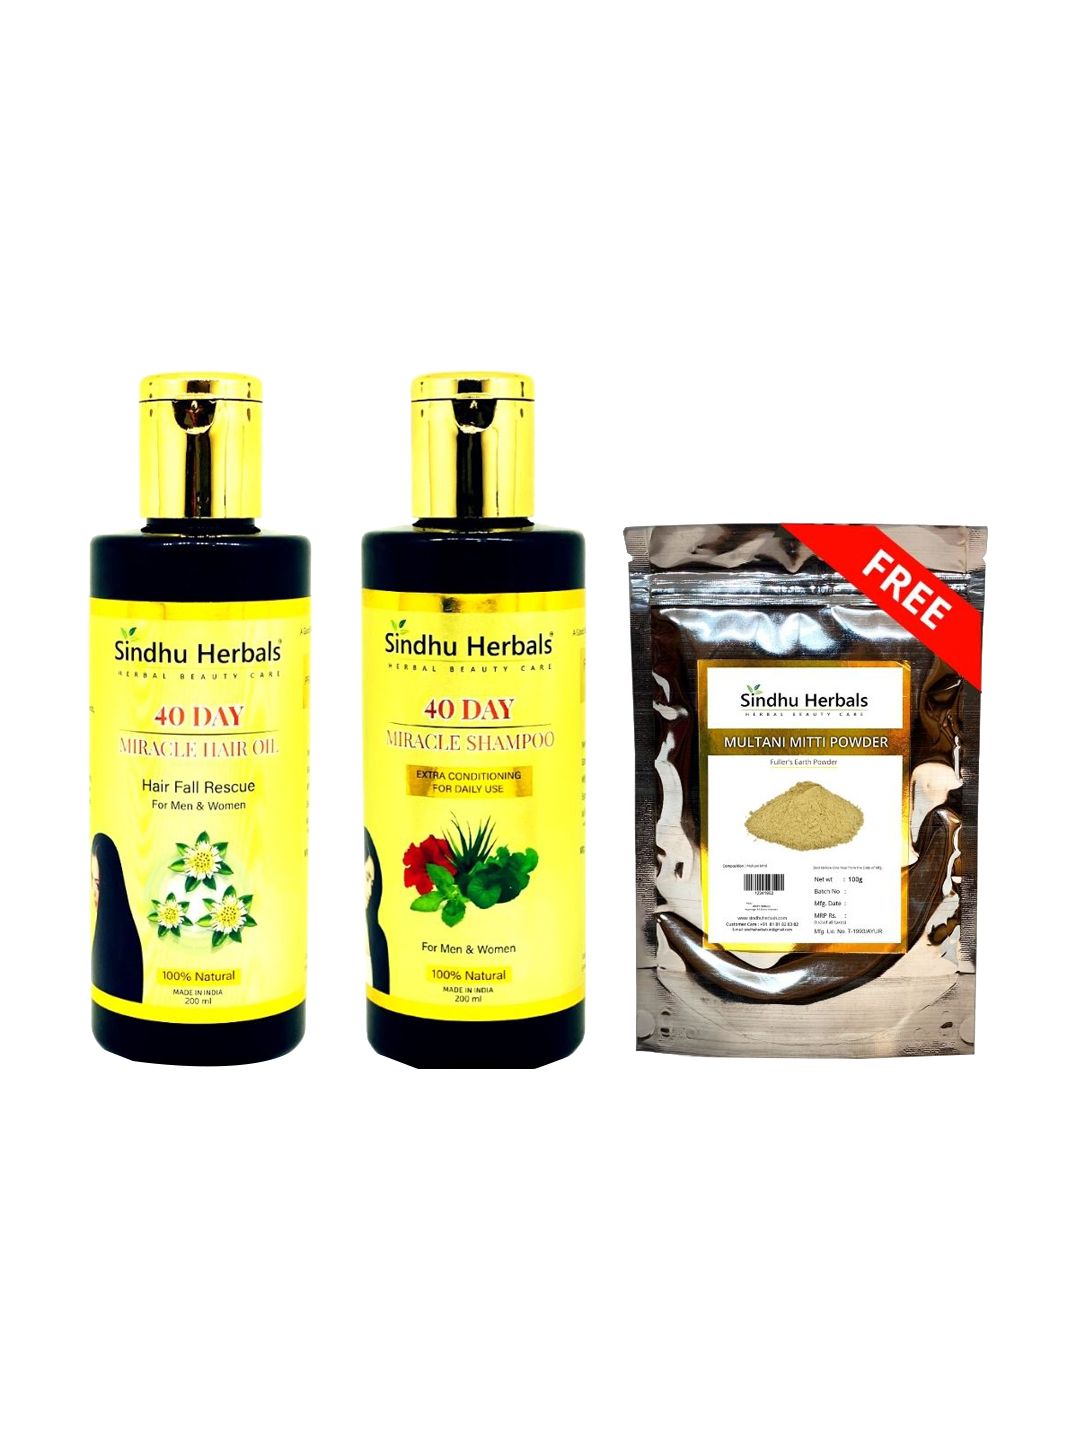 Sindhu Herbals Set of 40-Day Miracle Hair Oil & Shampoo with Free Multani Mitti Powder Price in India